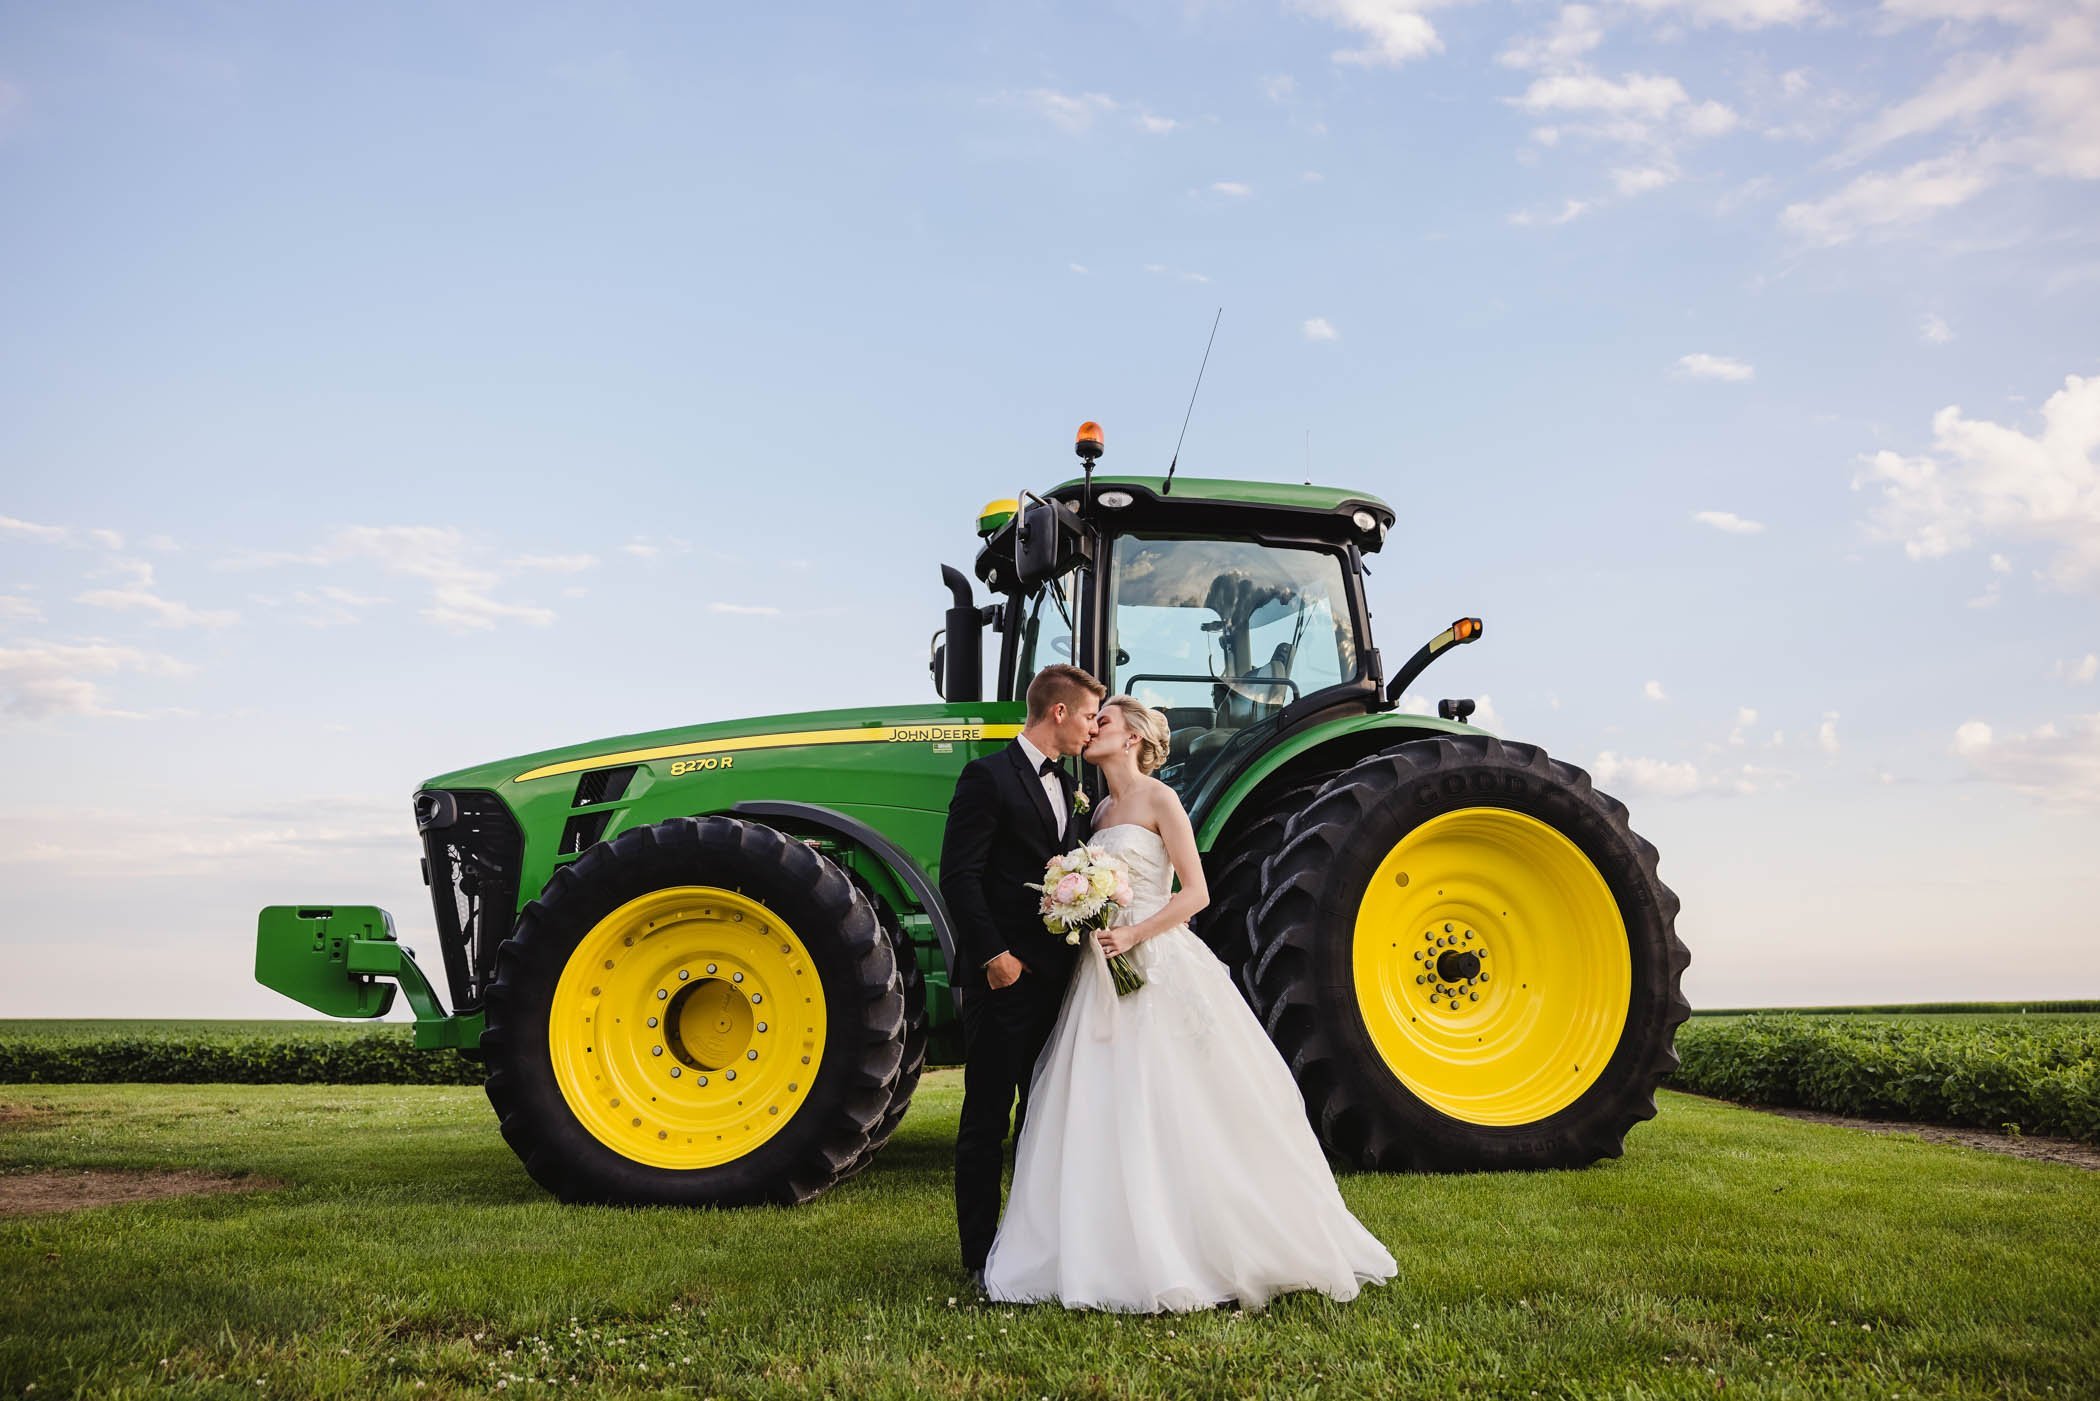 Bride and groom kiss with John Deere tractor